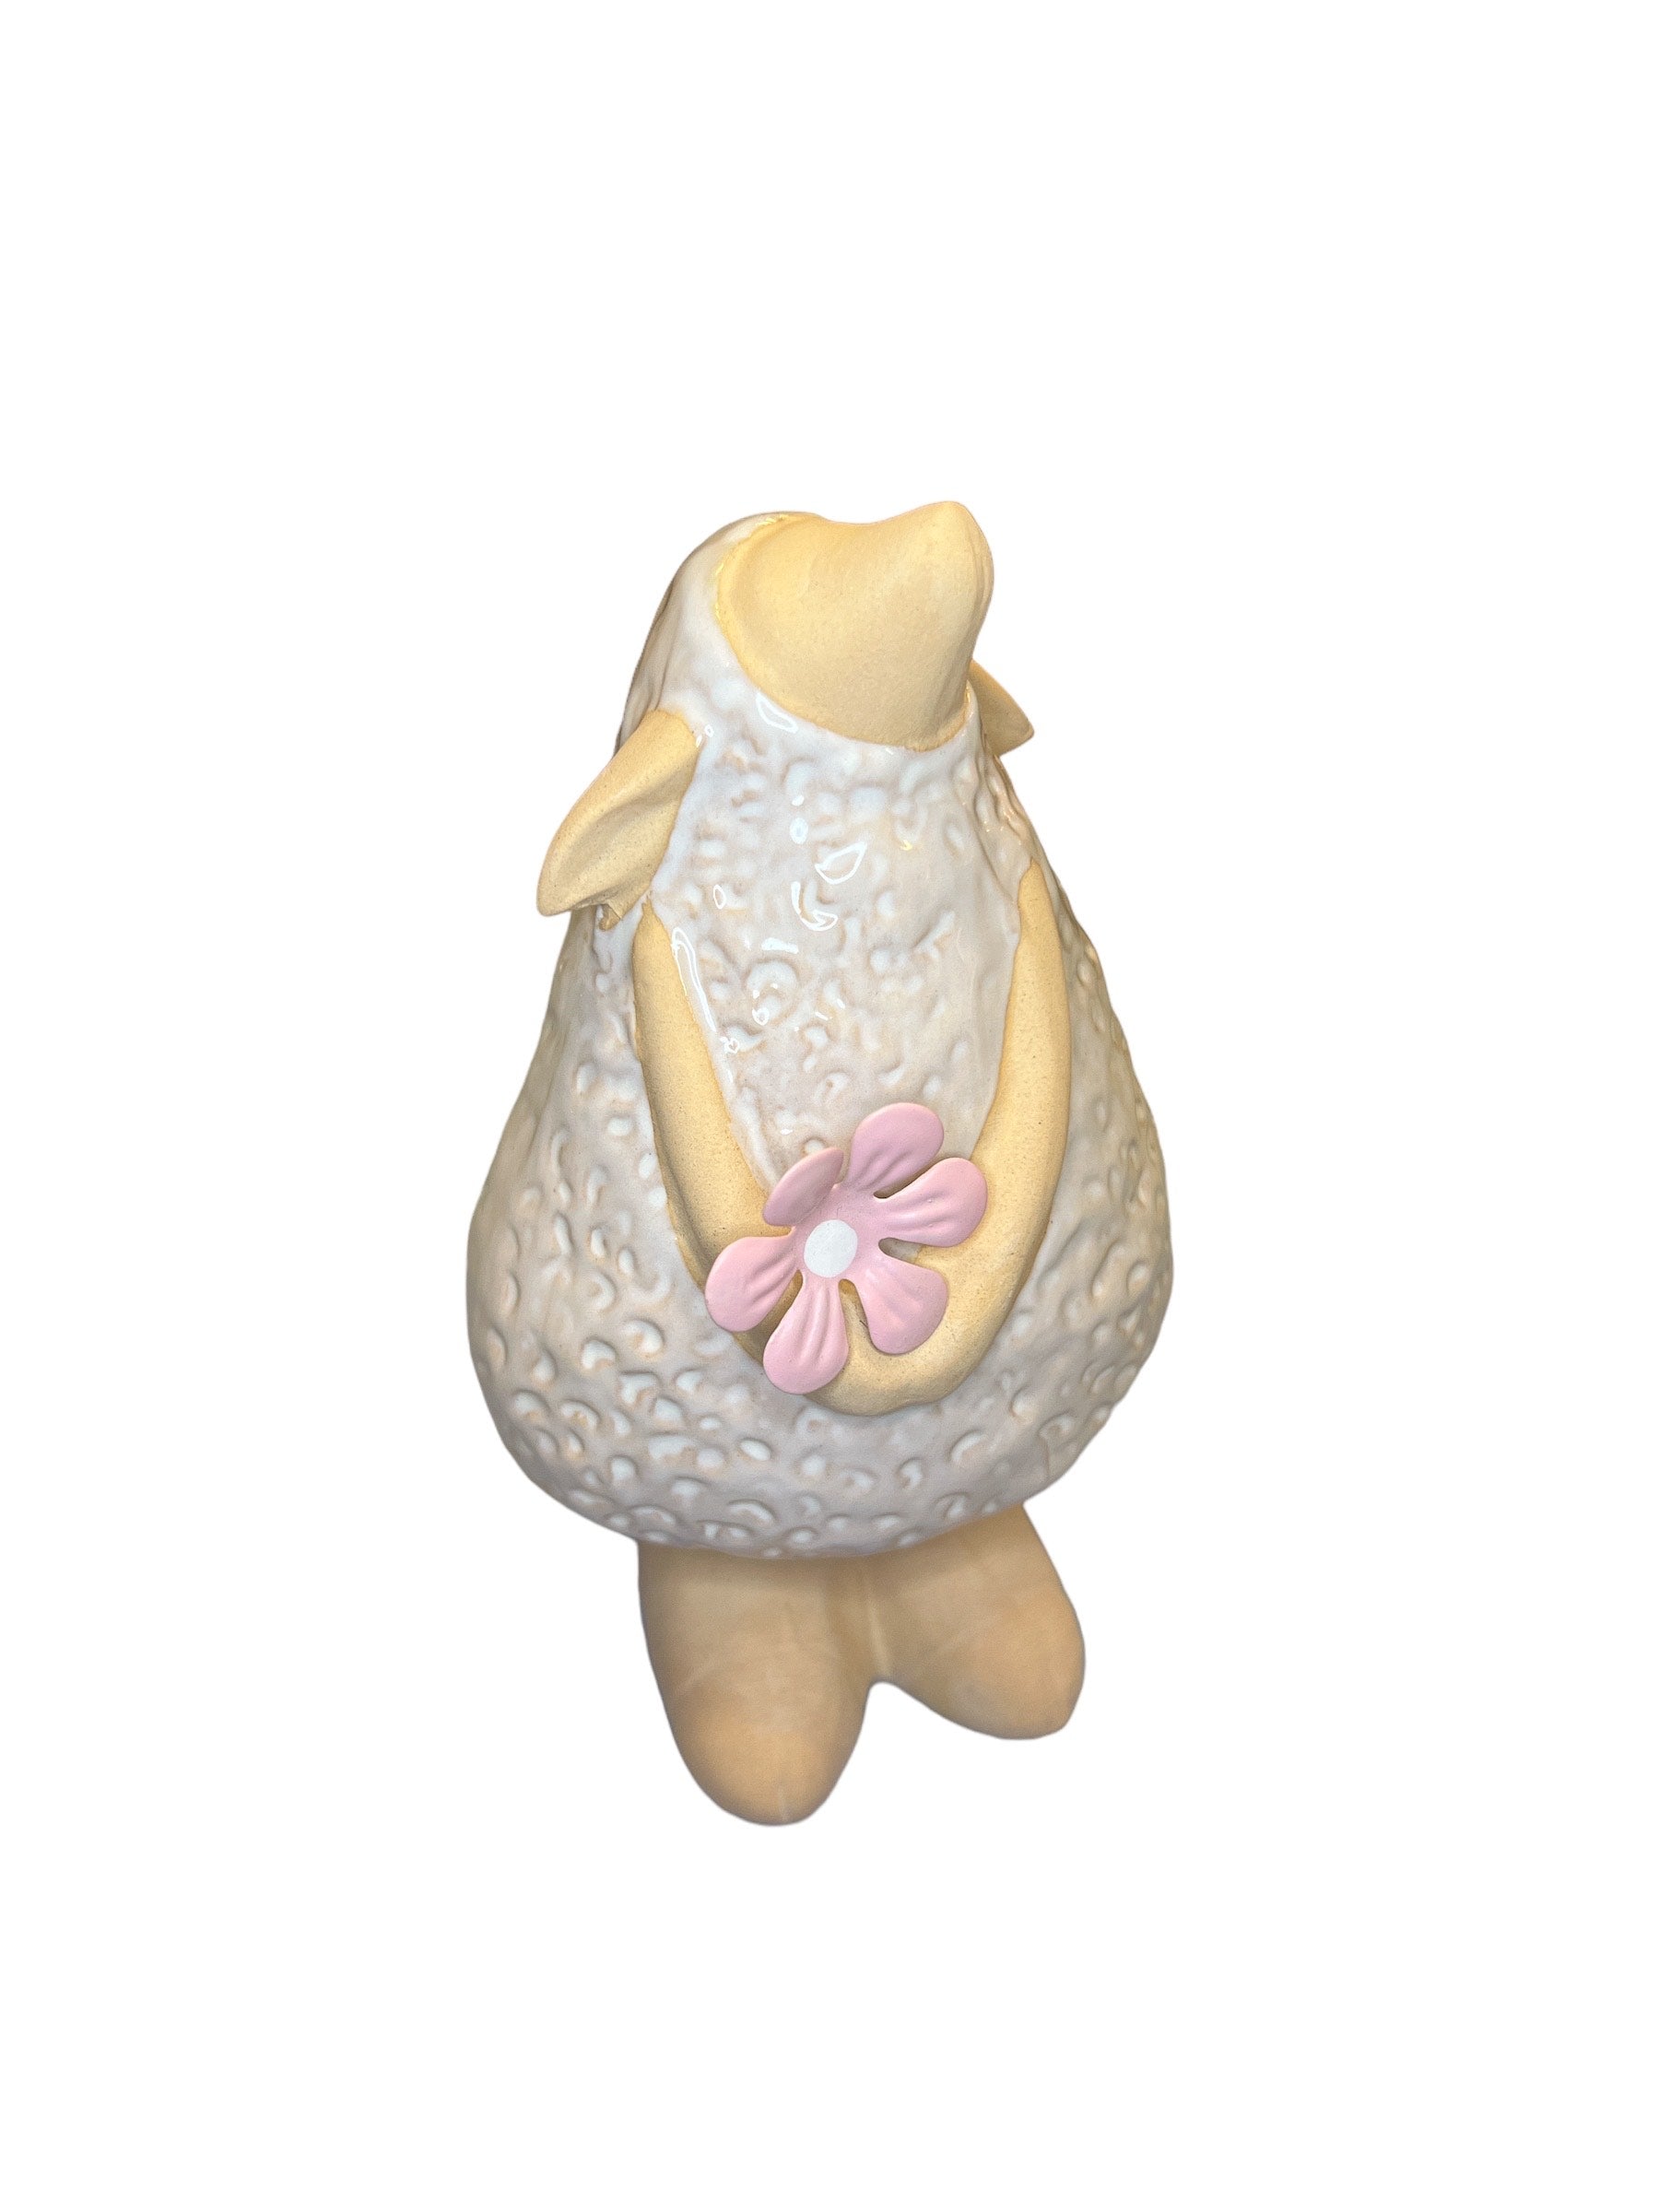 Spring Sheep Ornament Holding  Flower - Sold Singly